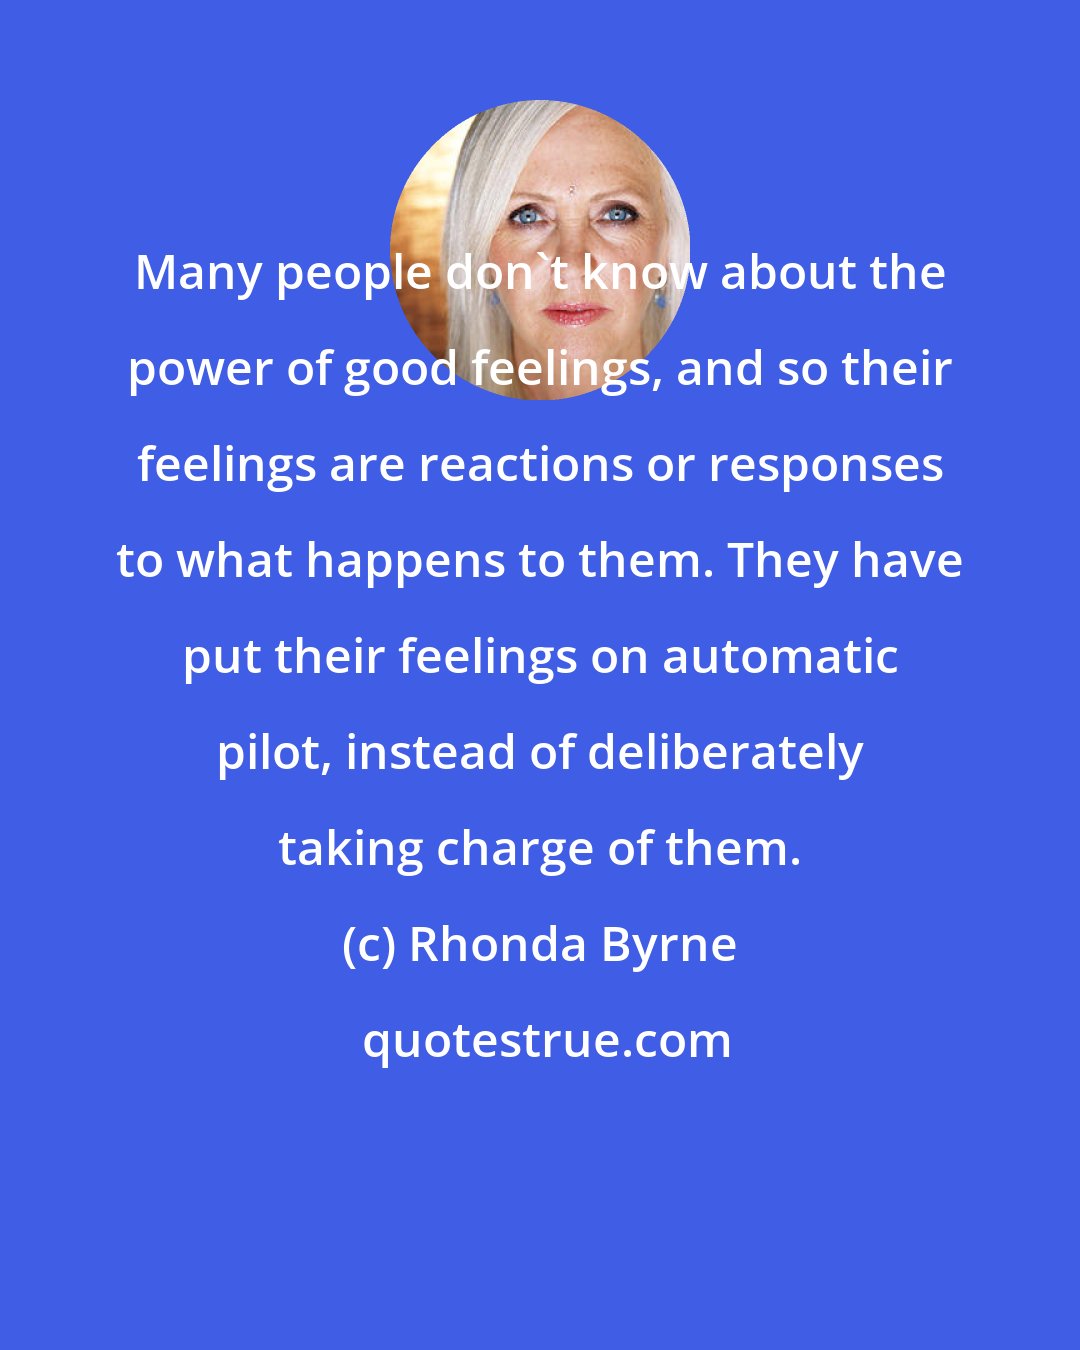 Rhonda Byrne: Many people don't know about the power of good feelings, and so their feelings are reactions or responses to what happens to them. They have put their feelings on automatic pilot, instead of deliberately taking charge of them.